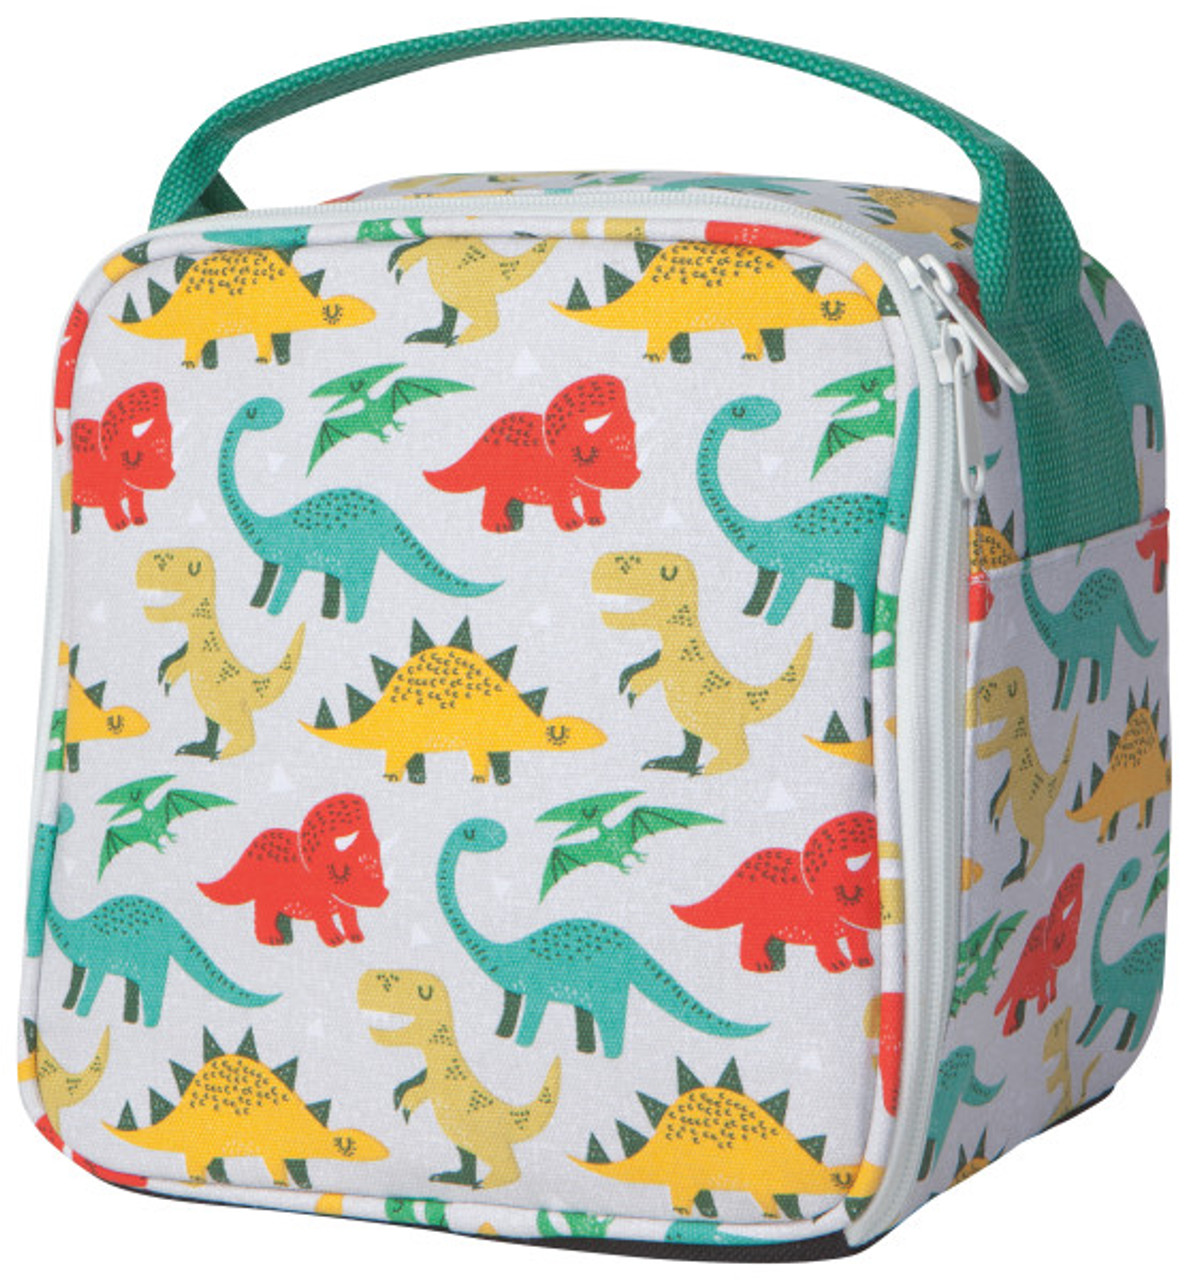 https://cdn11.bigcommerce.com/s-65gzldhg/images/stencil/1280x1280/products/3482/5348/lunch_bag_dandy_dinos__73221.1626305227.jpg?c=2